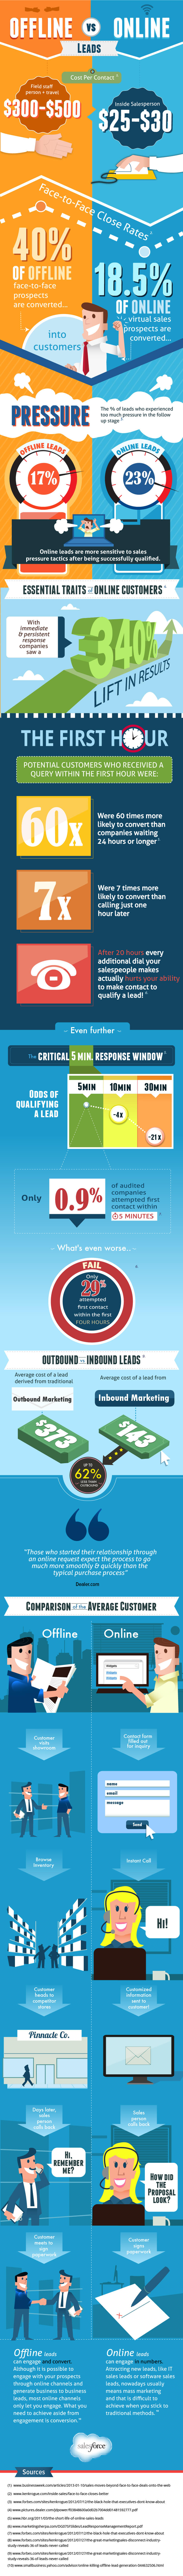 The Difference Between Online & Offline Leads